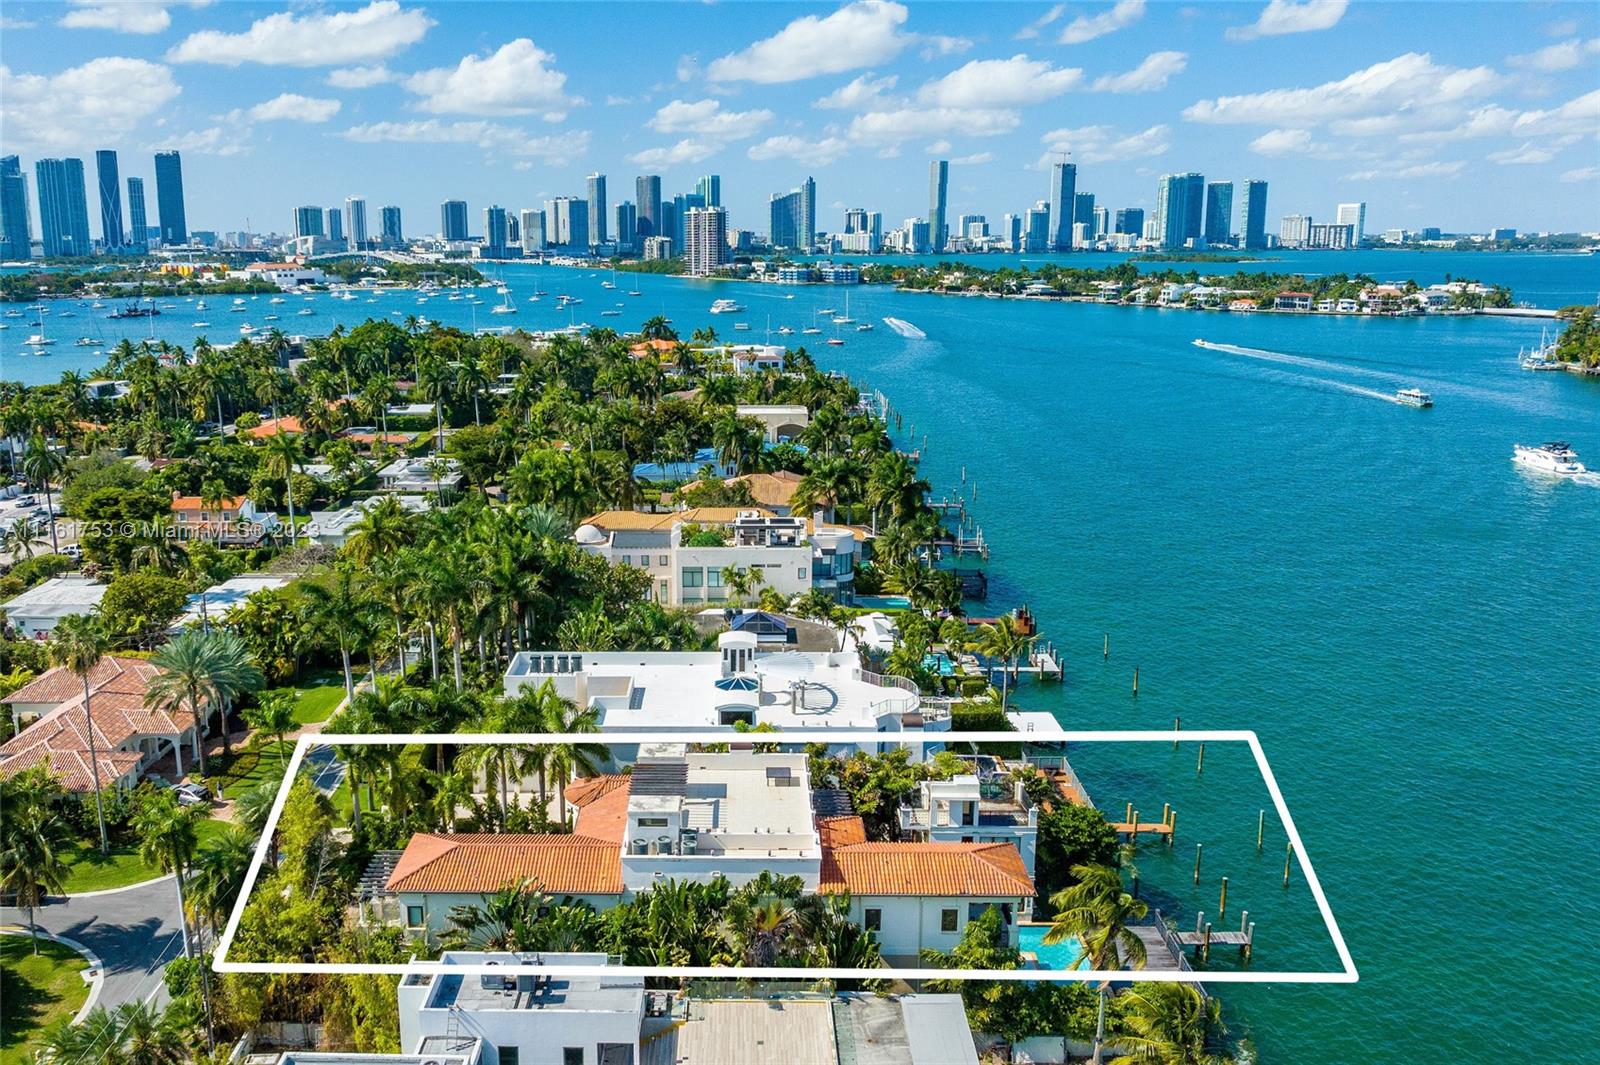 Enjoy waterfront living overlooking the waters of pristine Biscayne Bay in this 3-story private, gated home located within exclusive Hibiscus Island. Facing North w/ open waterways & 70’ of waterfrontage, this home is a boater’s paradise w/ a private dock to fit your yacht. The home boasts volume ceilings, oversized impact windows/doors, multiple private balconies, a completely detached guesthouse overlooking the water, 2 car garage & a 1,200 SF private rooftop terrace w/ spectacular views of Biscayne Bay, the Downtown Miami Skyline & Port of Miami. Live on an island in the middle of the city. Hibiscus Island offers a waterfront park, tennis & basketball courts, playgrounds, 24 hour manned police officer at the main entrance, all within a short distance of the best Miami has to offer